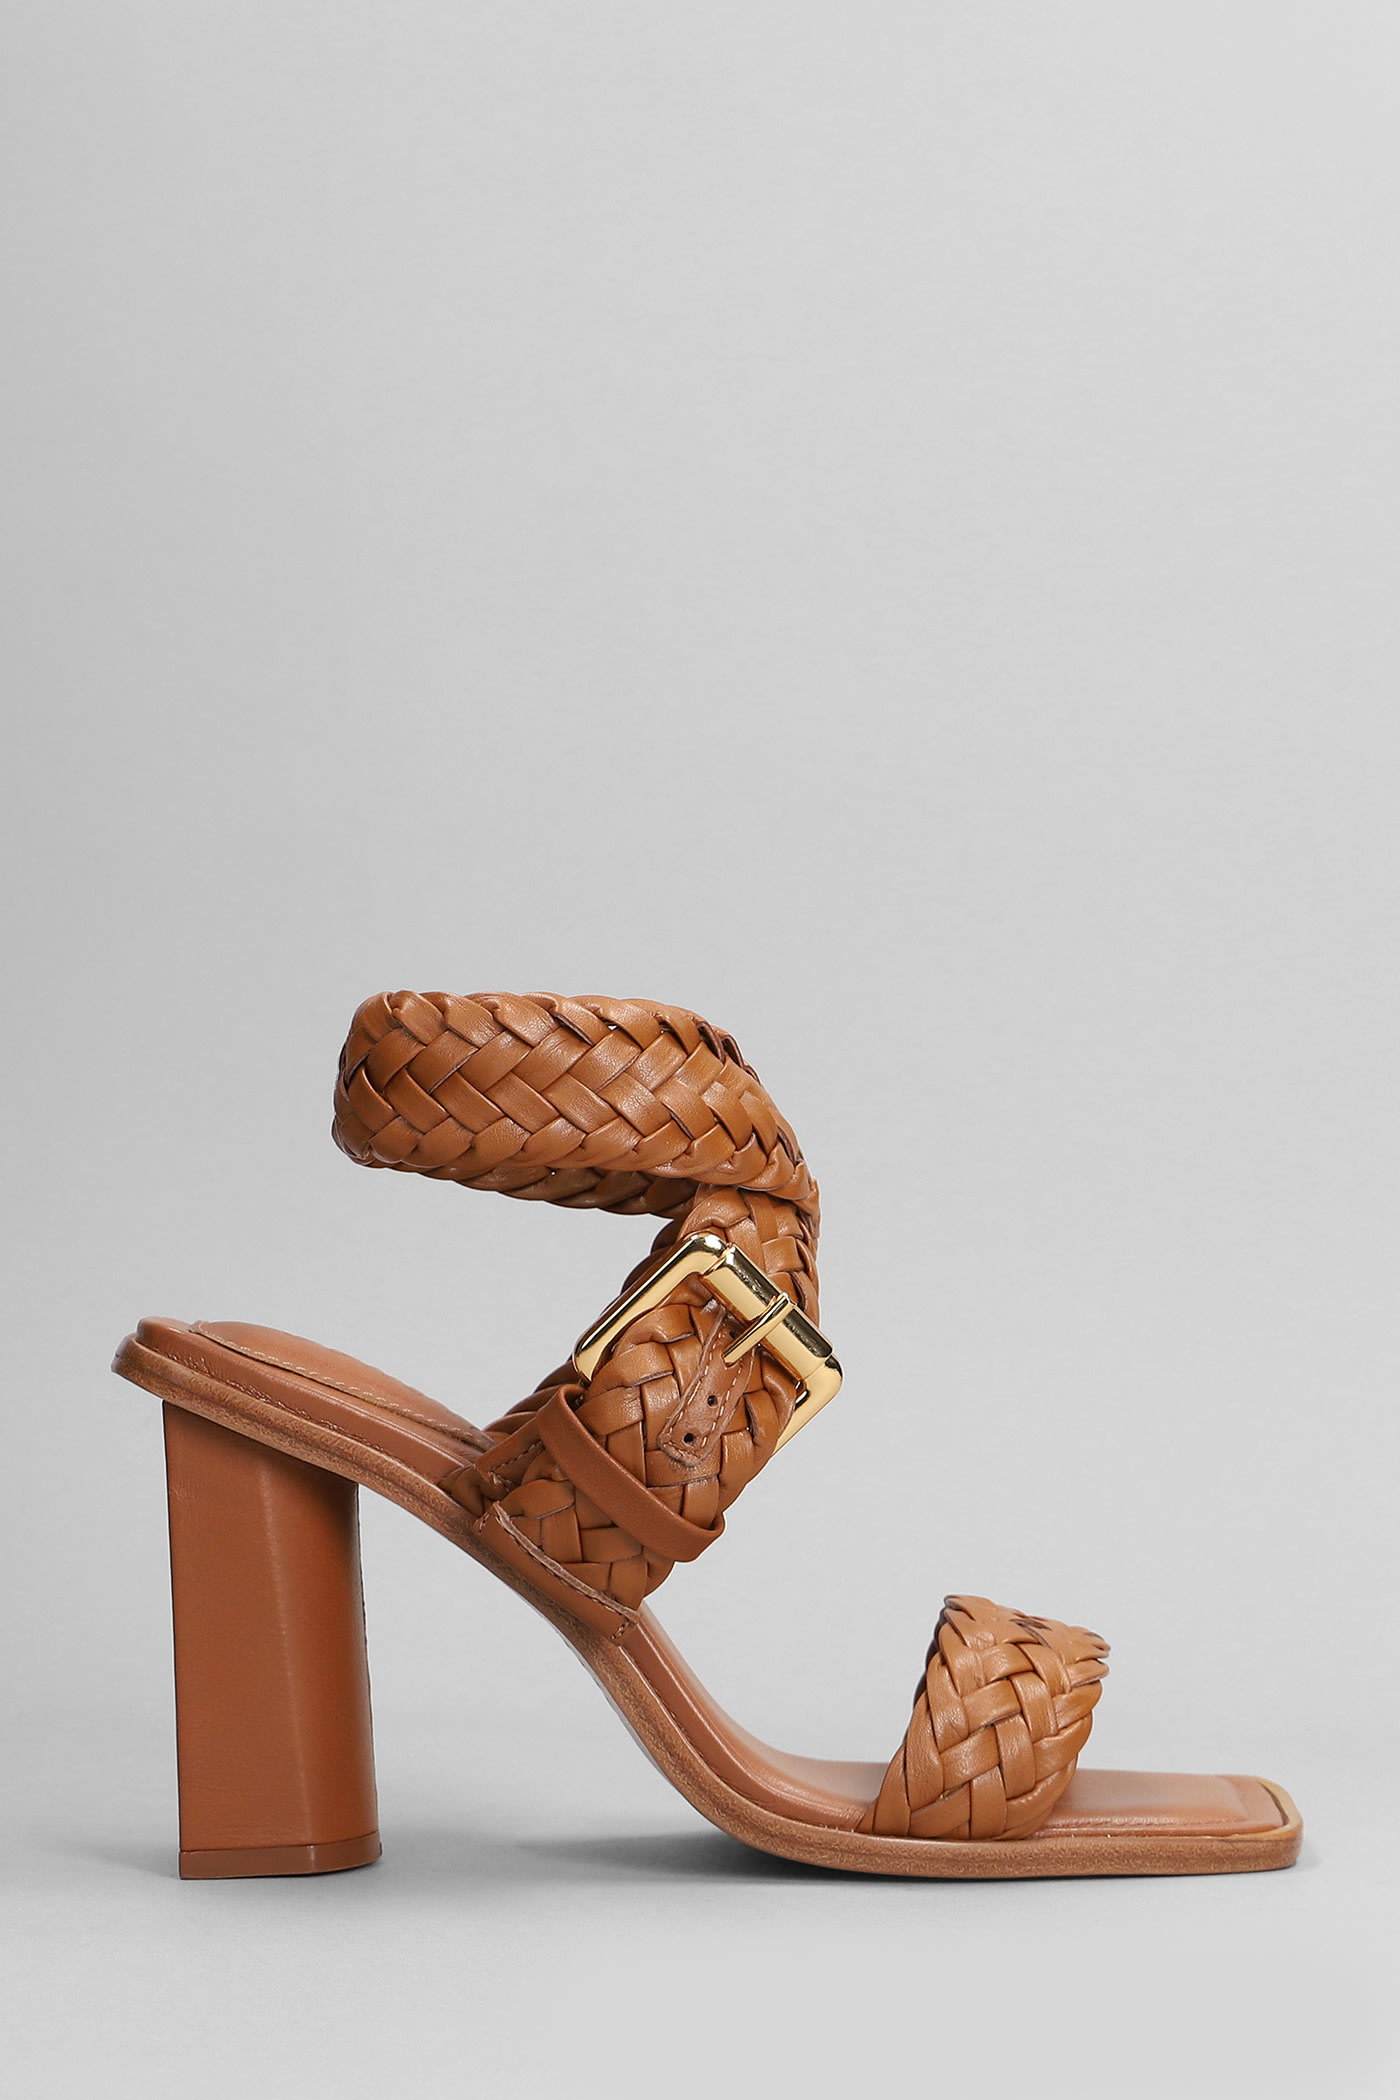 Schutz Sandals In Leather Colour Leather